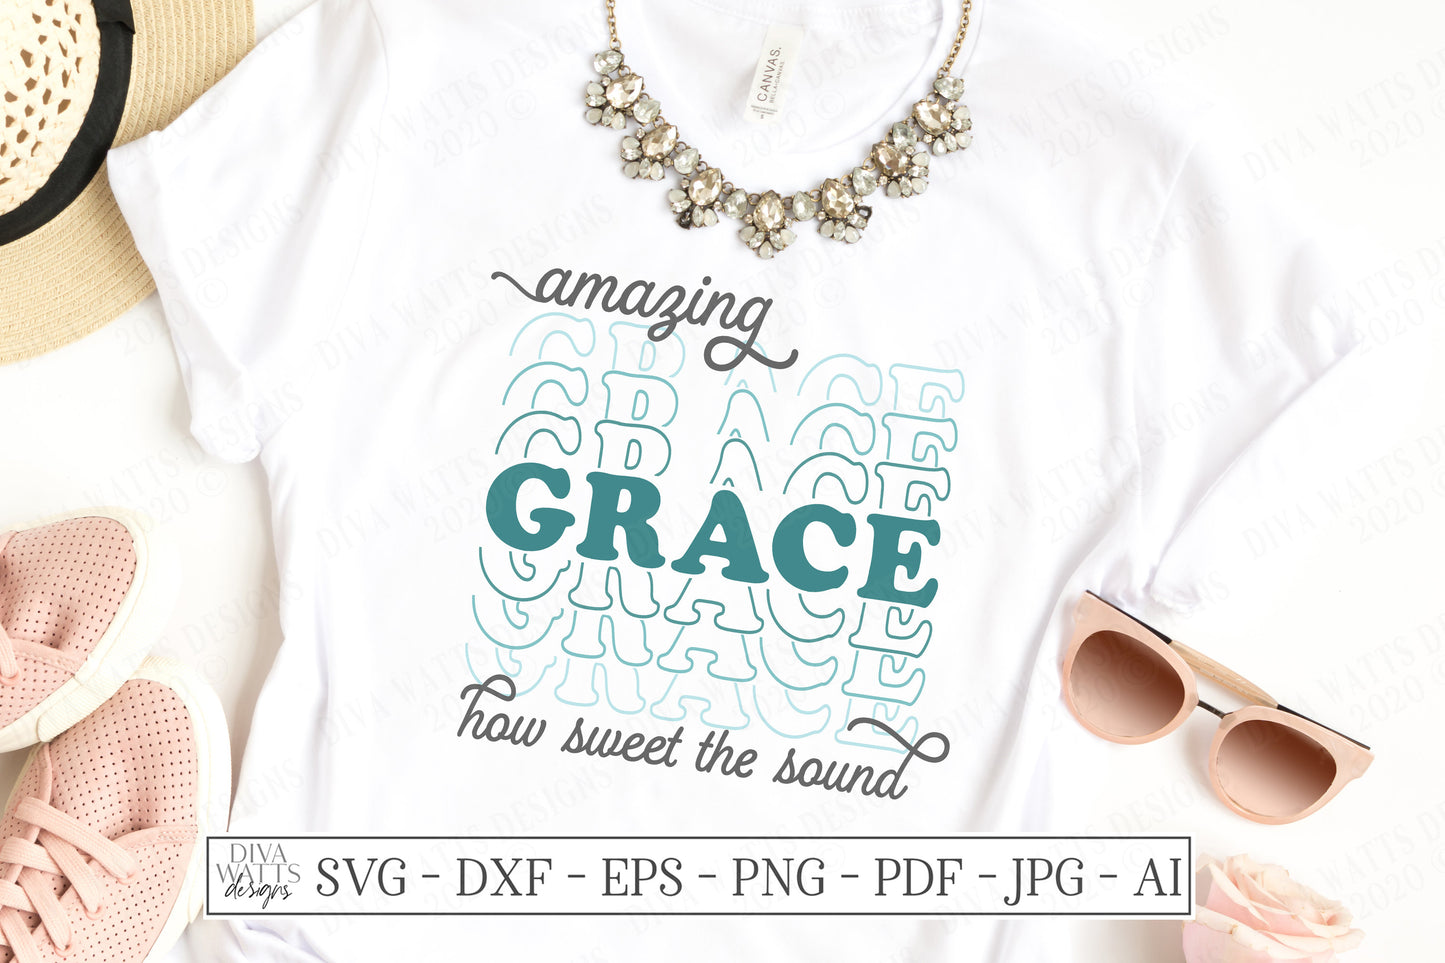 SVG | Amazing Grace | Cutting File | Stacked Mirrored Font Text | Christian Hymn Music Song | Shirt Tote Sign | Vinyl Stencil HTV | DXF eps